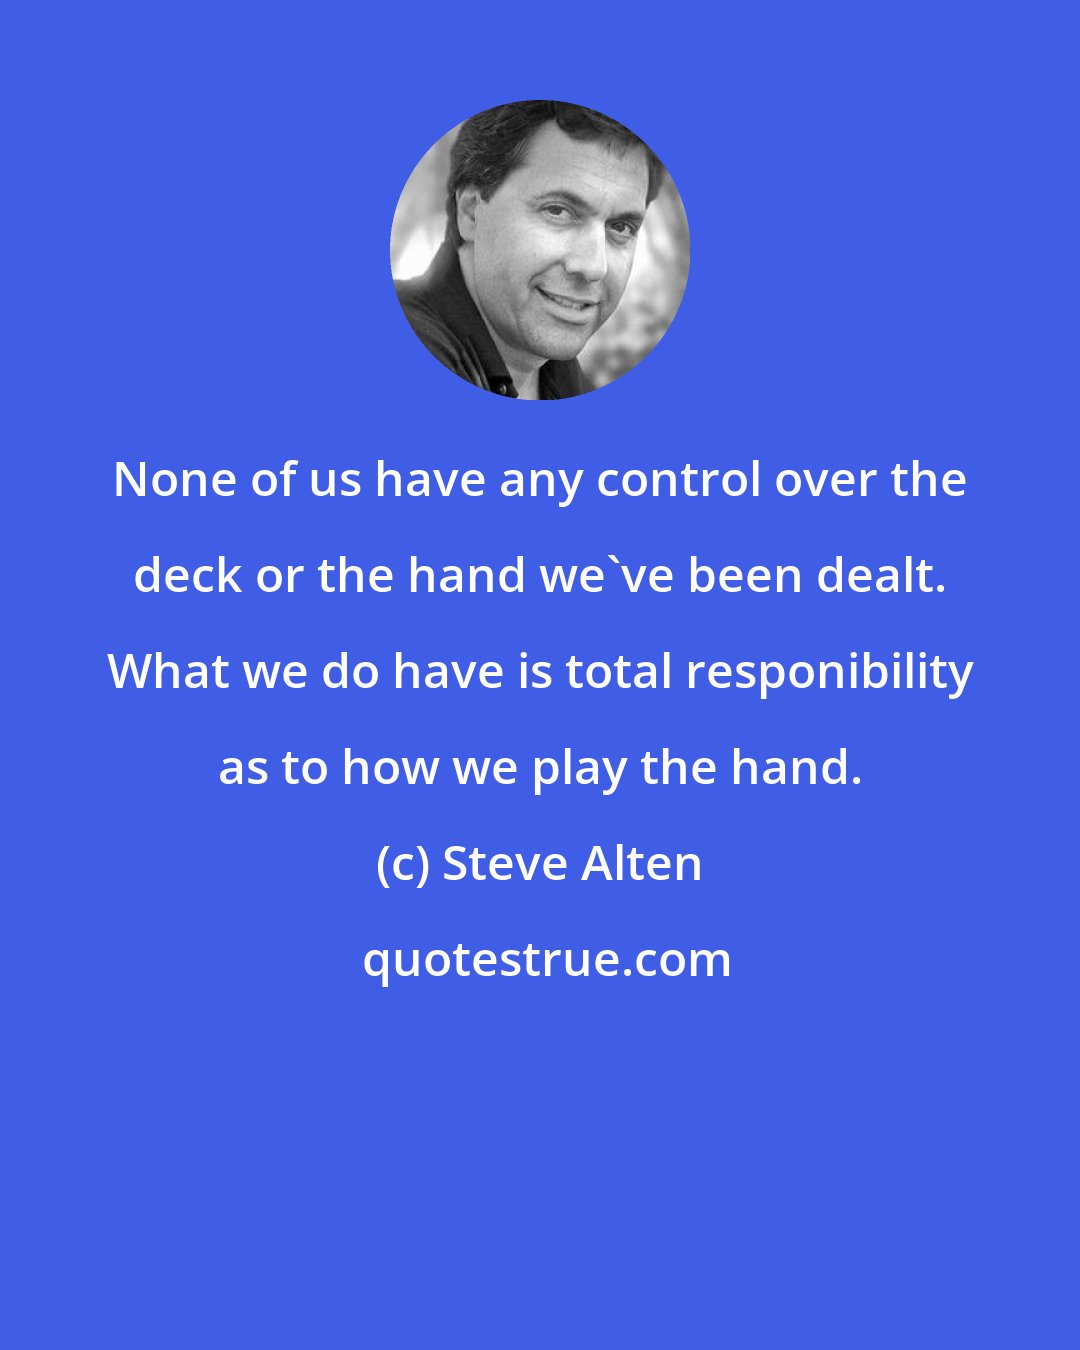 Steve Alten: None of us have any control over the deck or the hand we've been dealt. What we do have is total responibility as to how we play the hand.